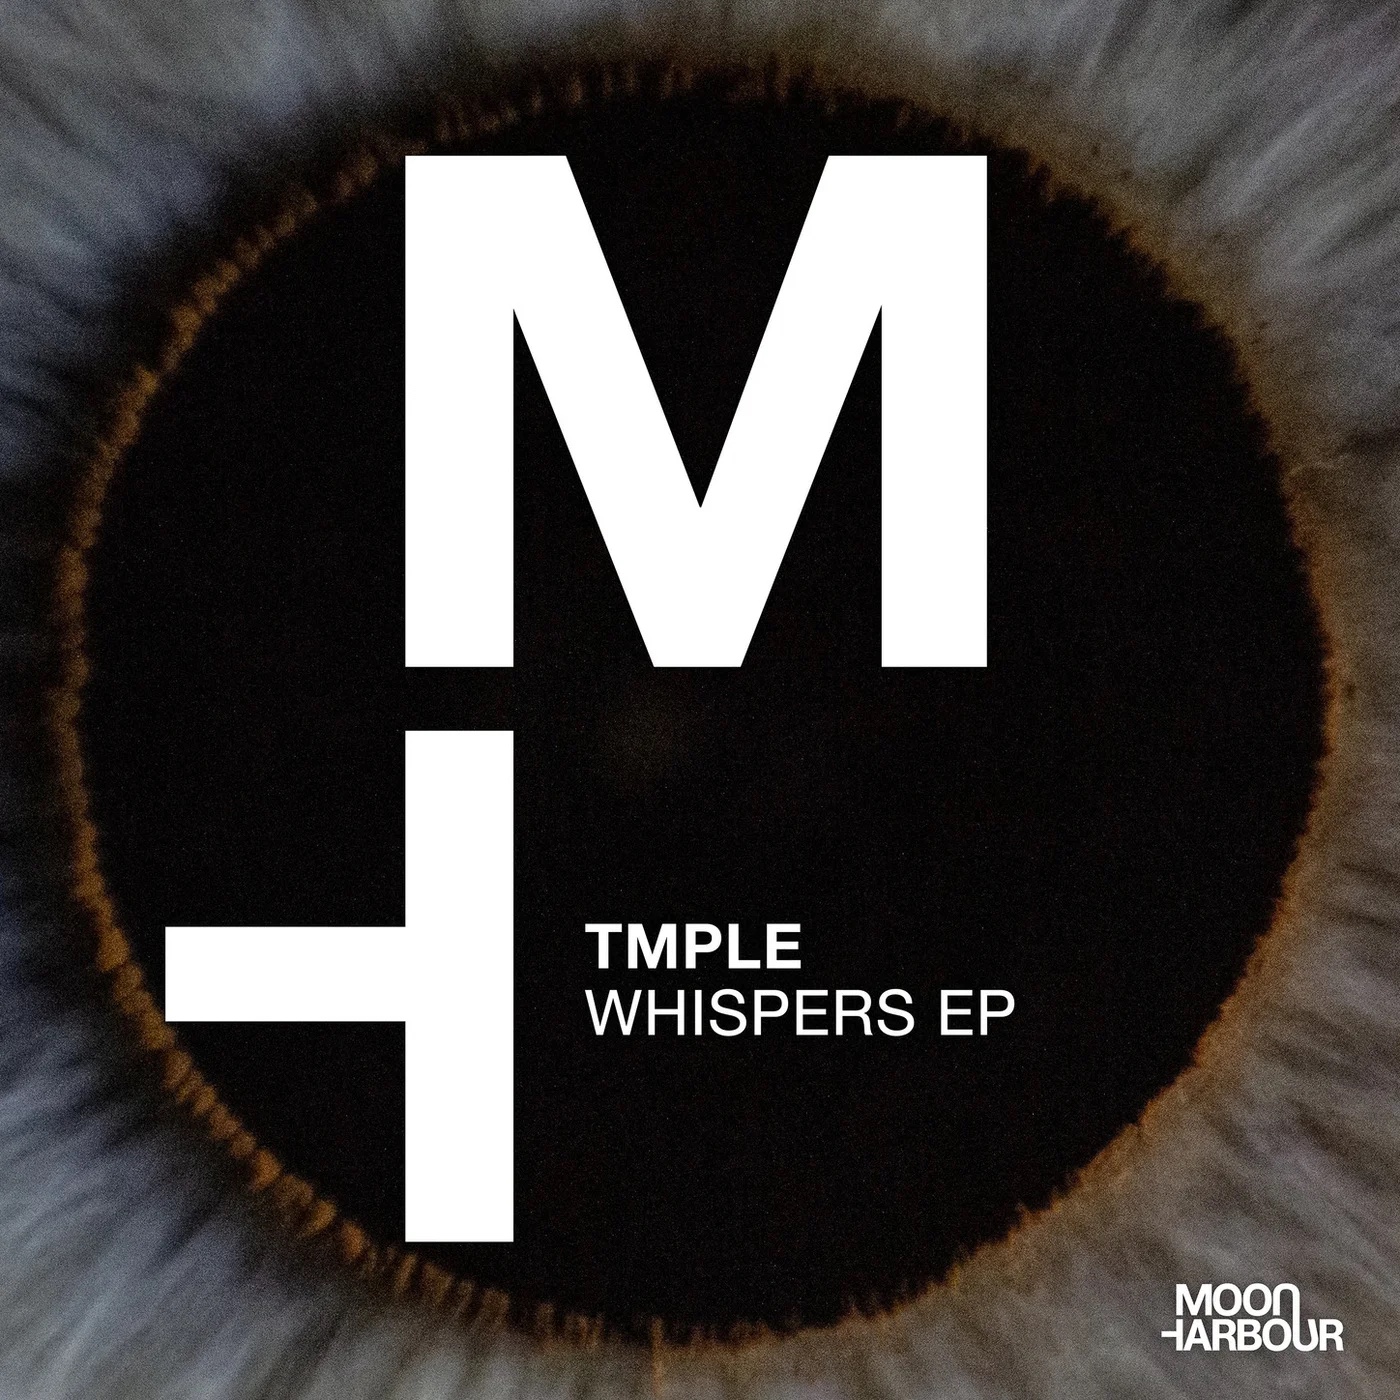 TMPLE – Whispers EP [MHD161]